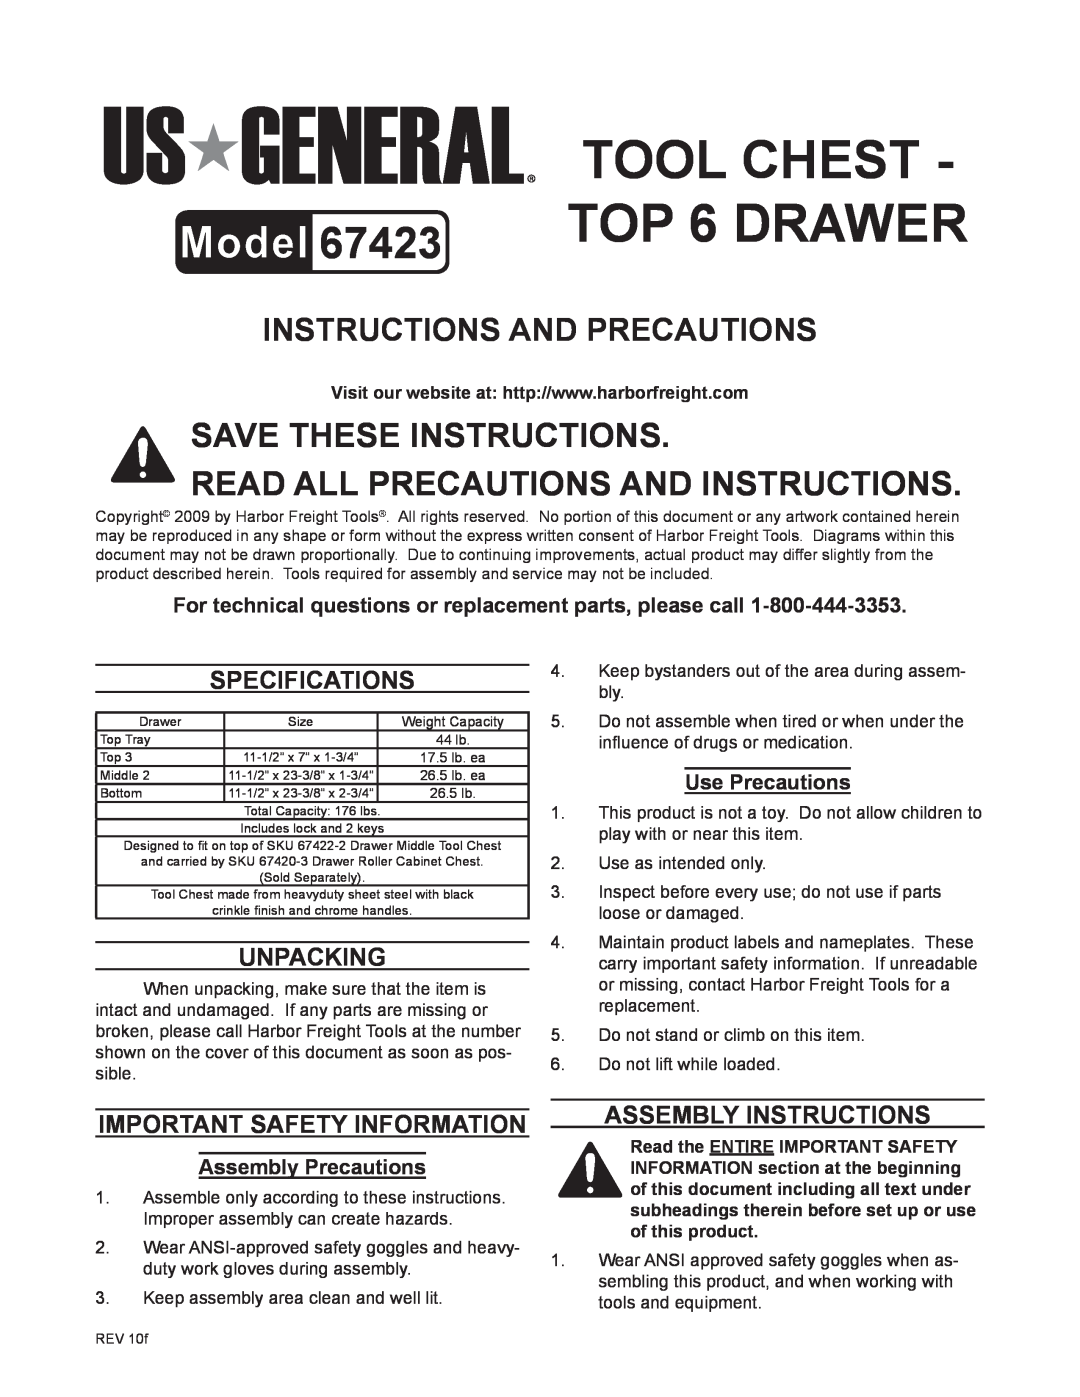 Harbor Freight Tools 67423 specifications Specifications, Unpacking, Assembly Instructions, Important SAFETY Information 